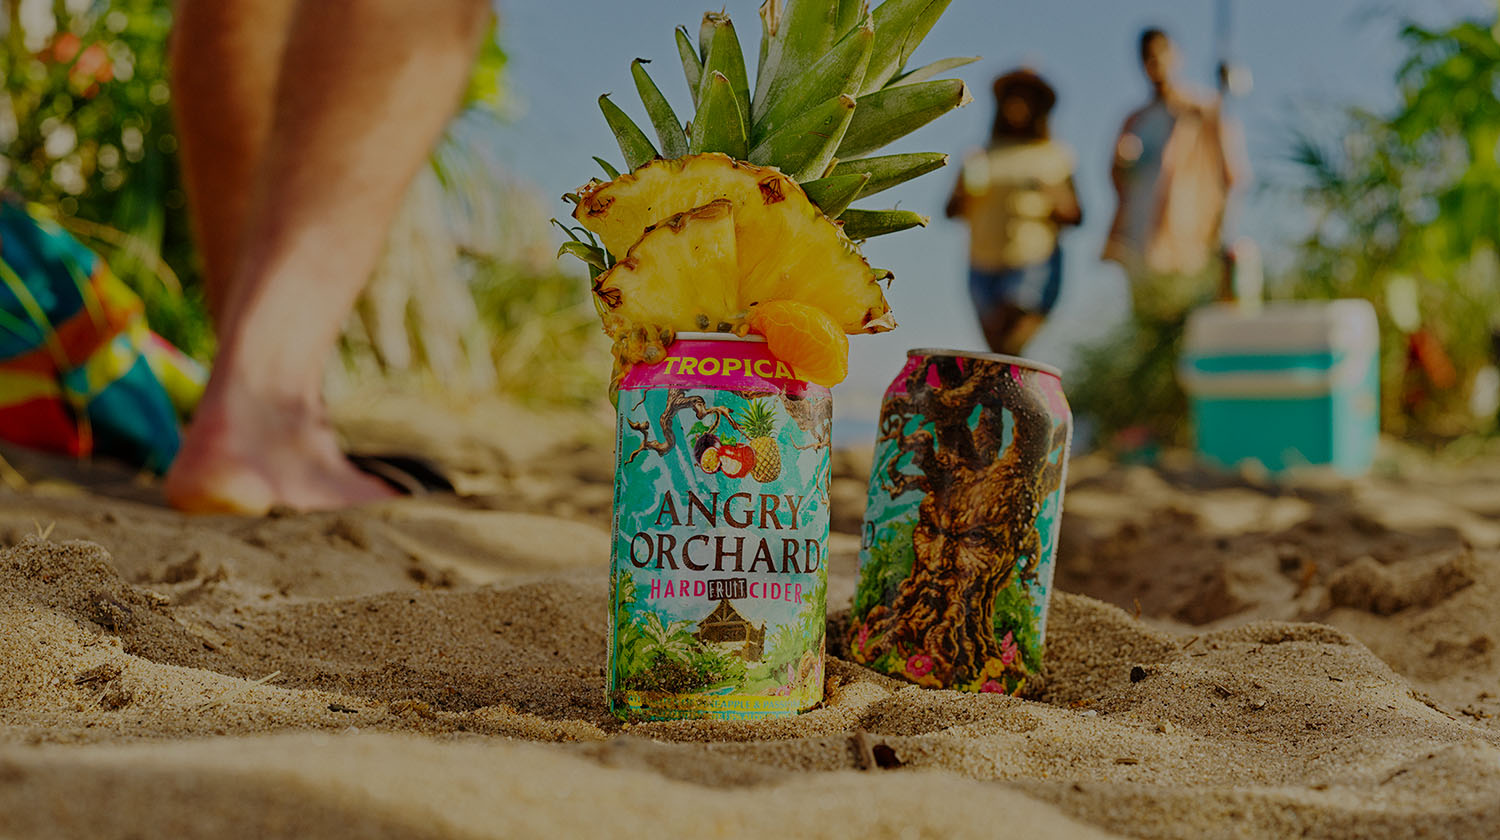 Angry Orchard Tropical Fruit Cider